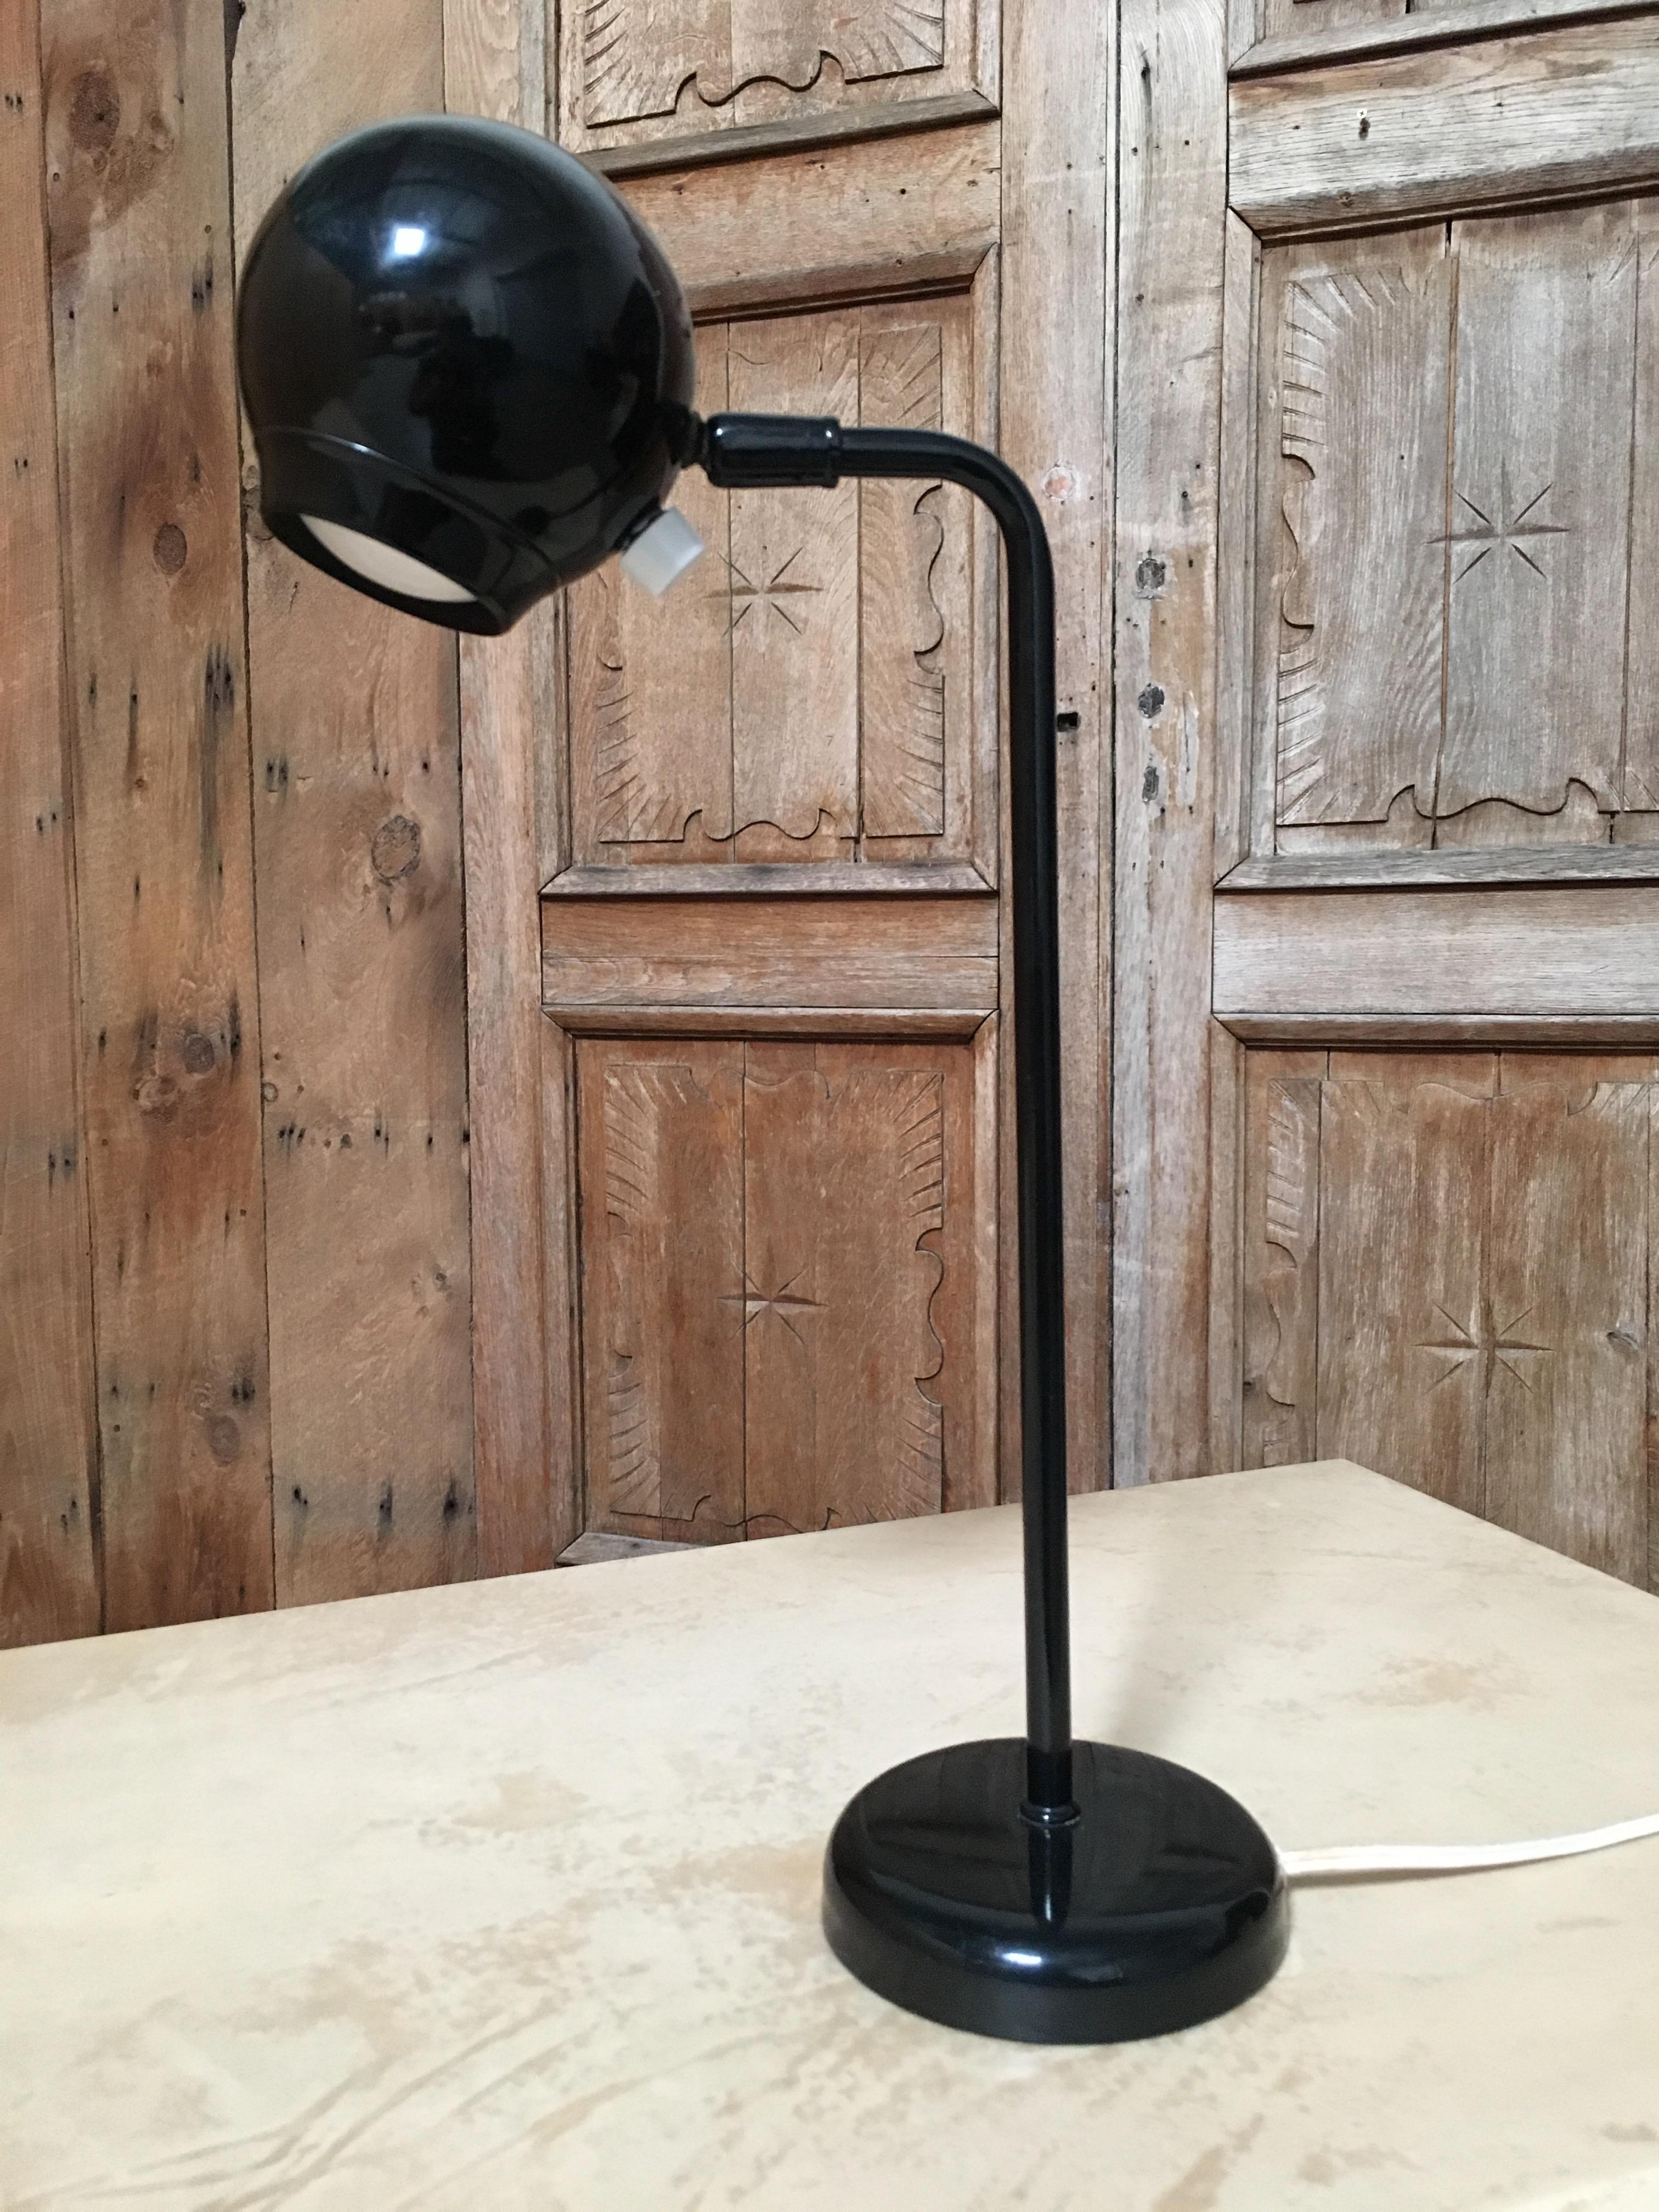 A desk or table lamp with black enamel finish task lighting label with Kovacs name.
   